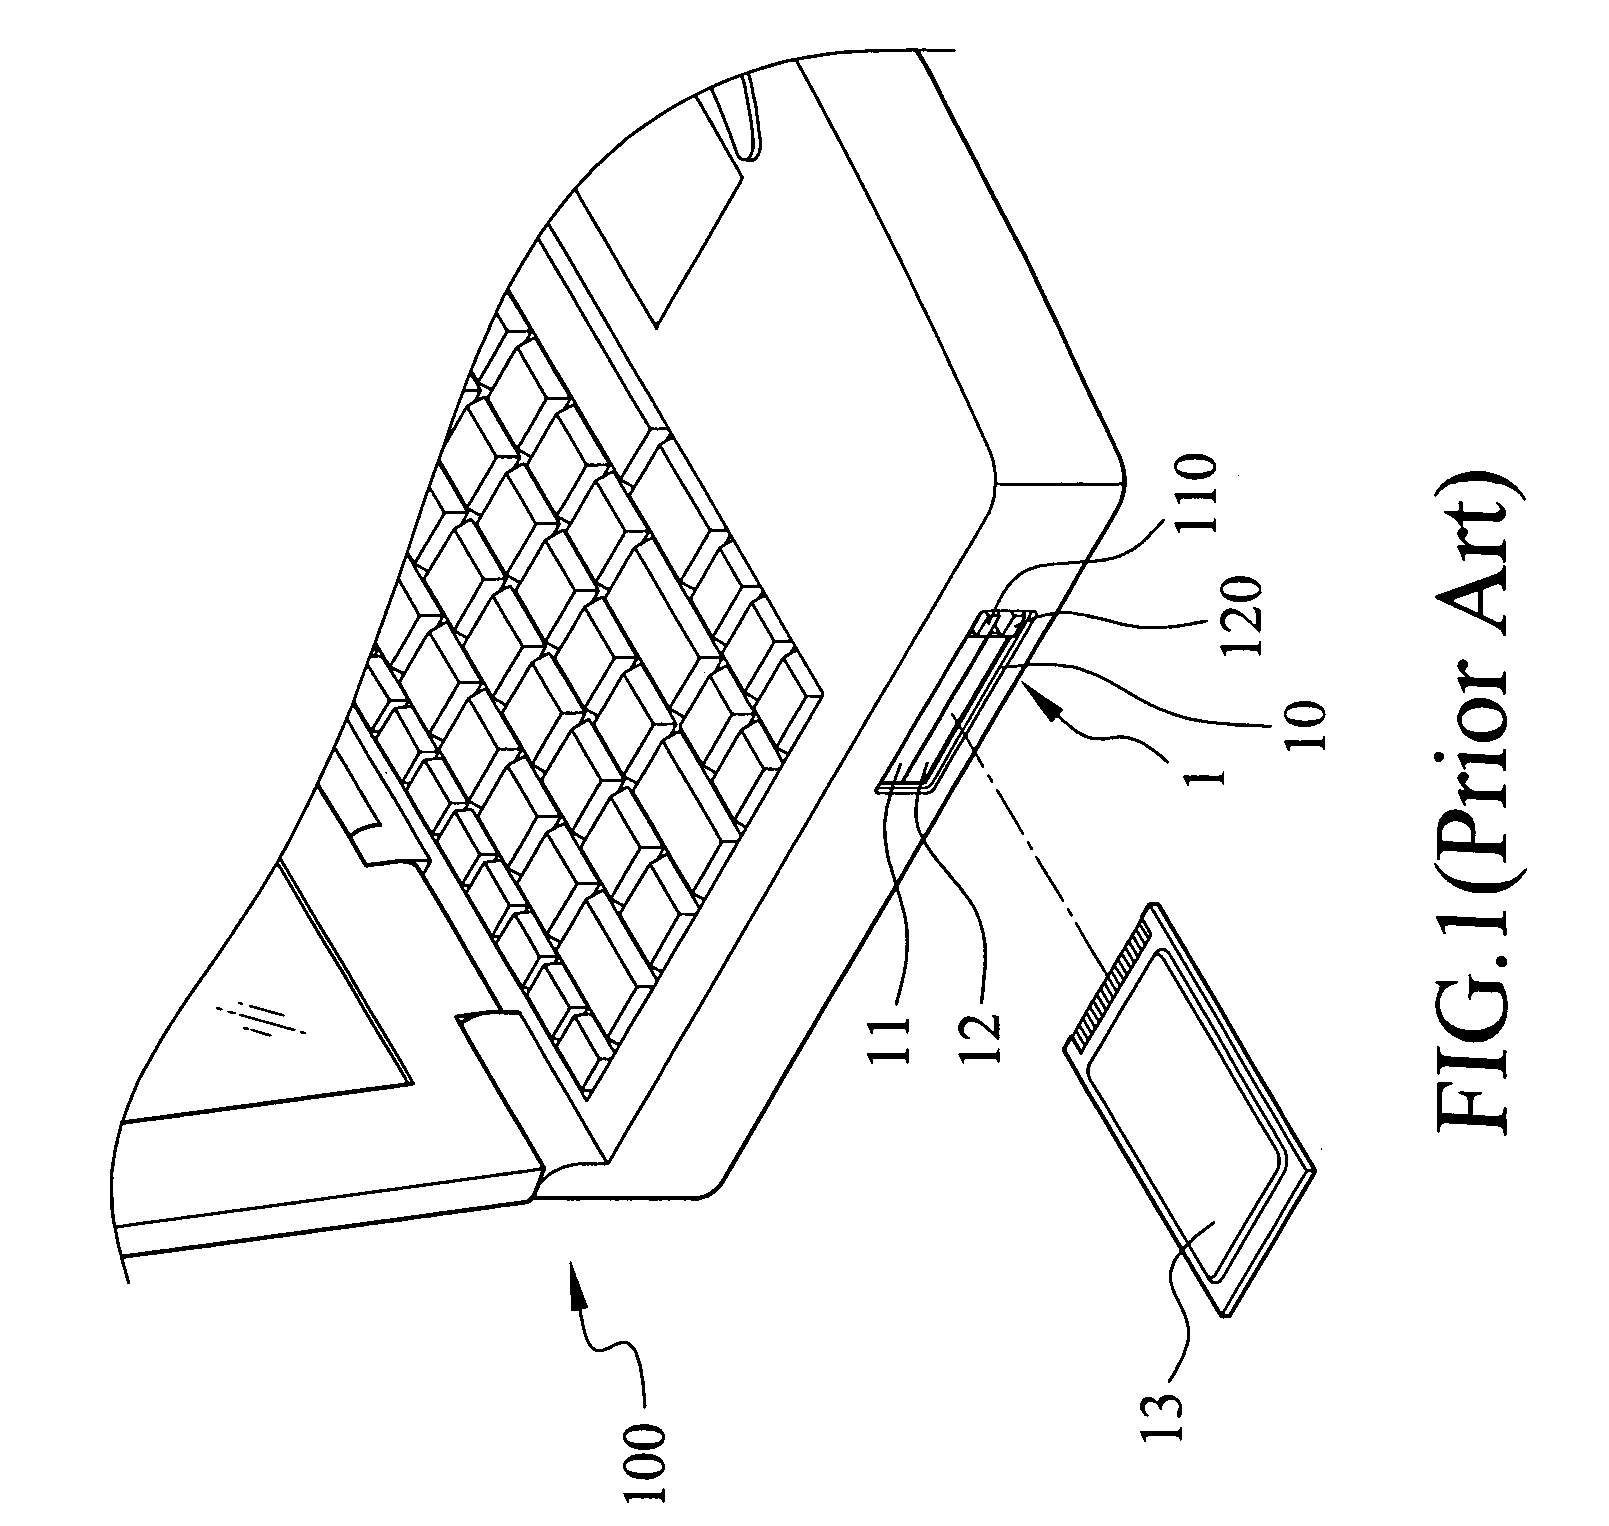 Adaptor device for connecting and accessing data card and computer device incorporating the adaptor device